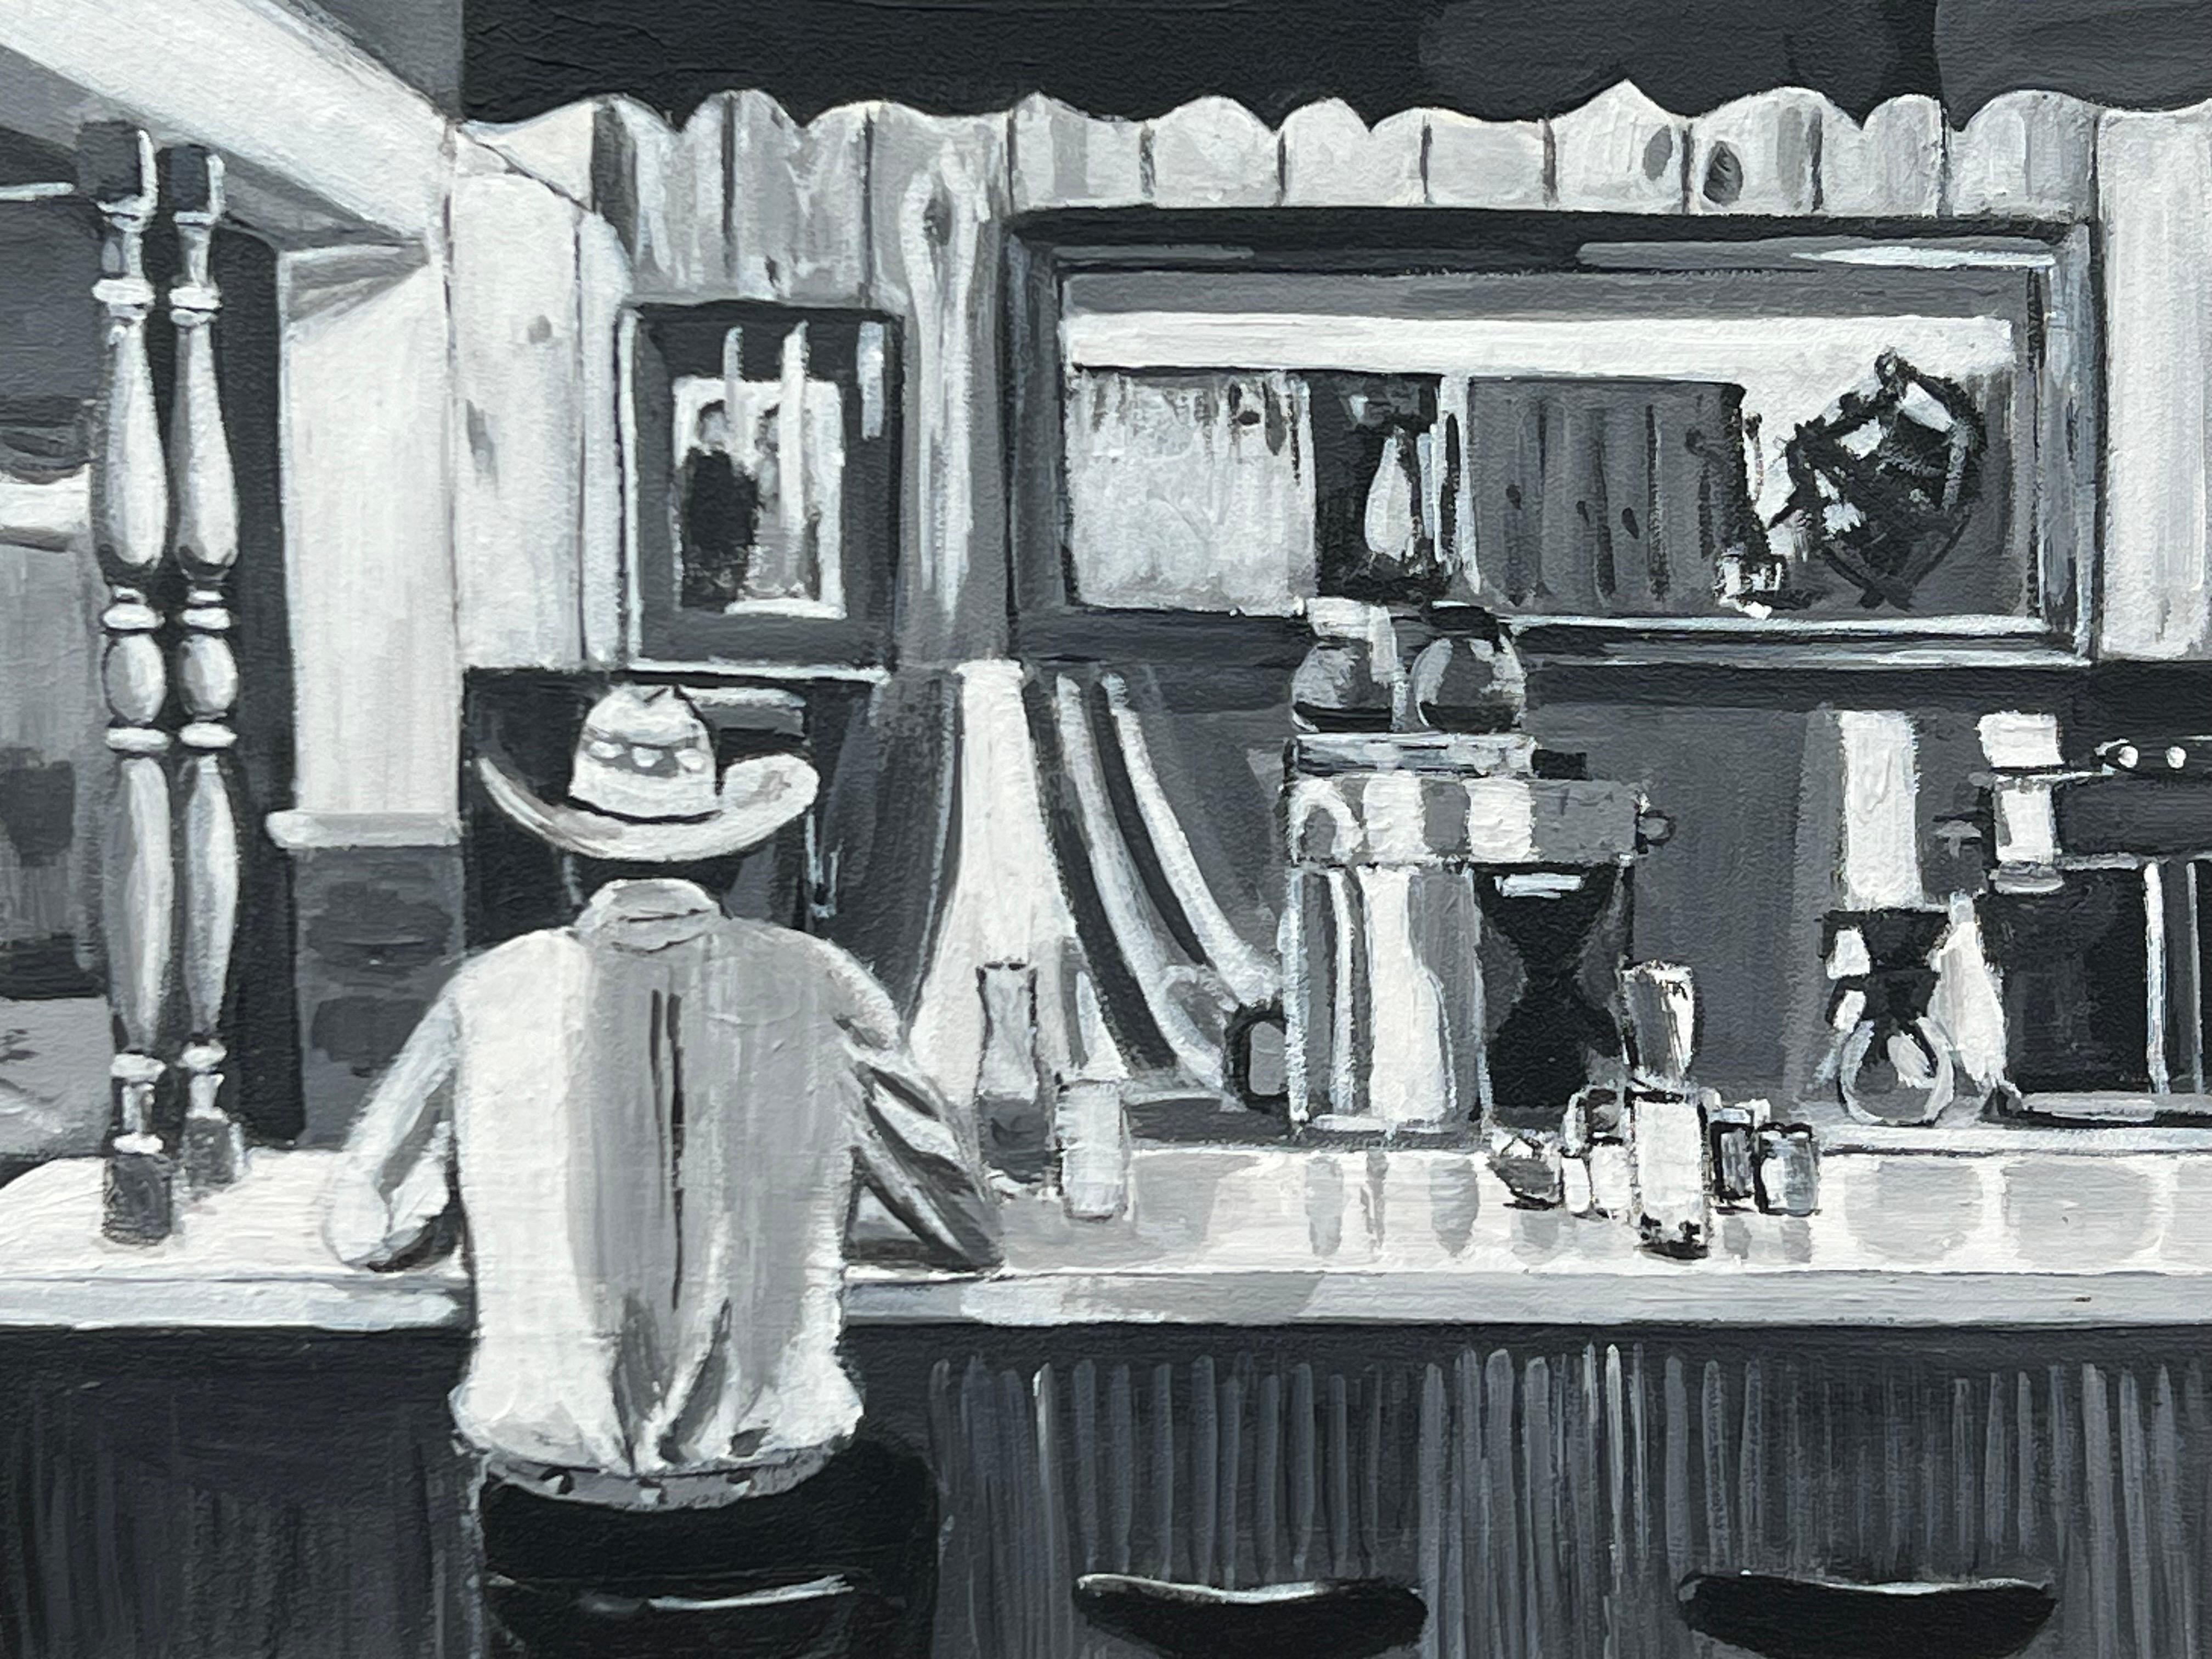 American Cowboy Diner Painting by British Contemporary Artist in Black & White 5